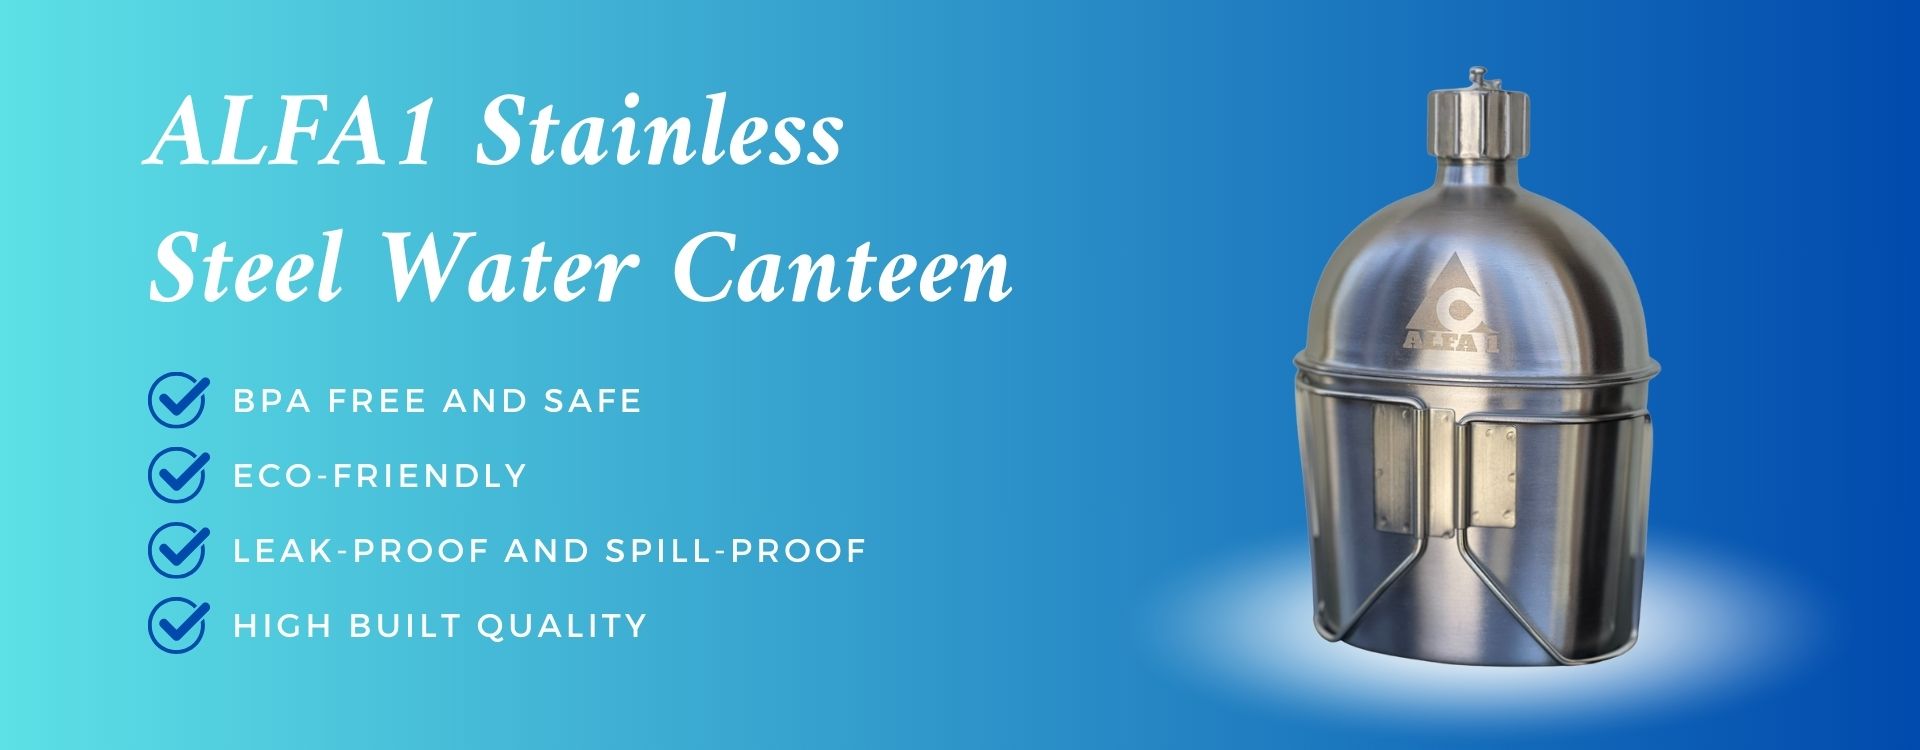 ALFA1 Stainless Steel Water Canteen Banner